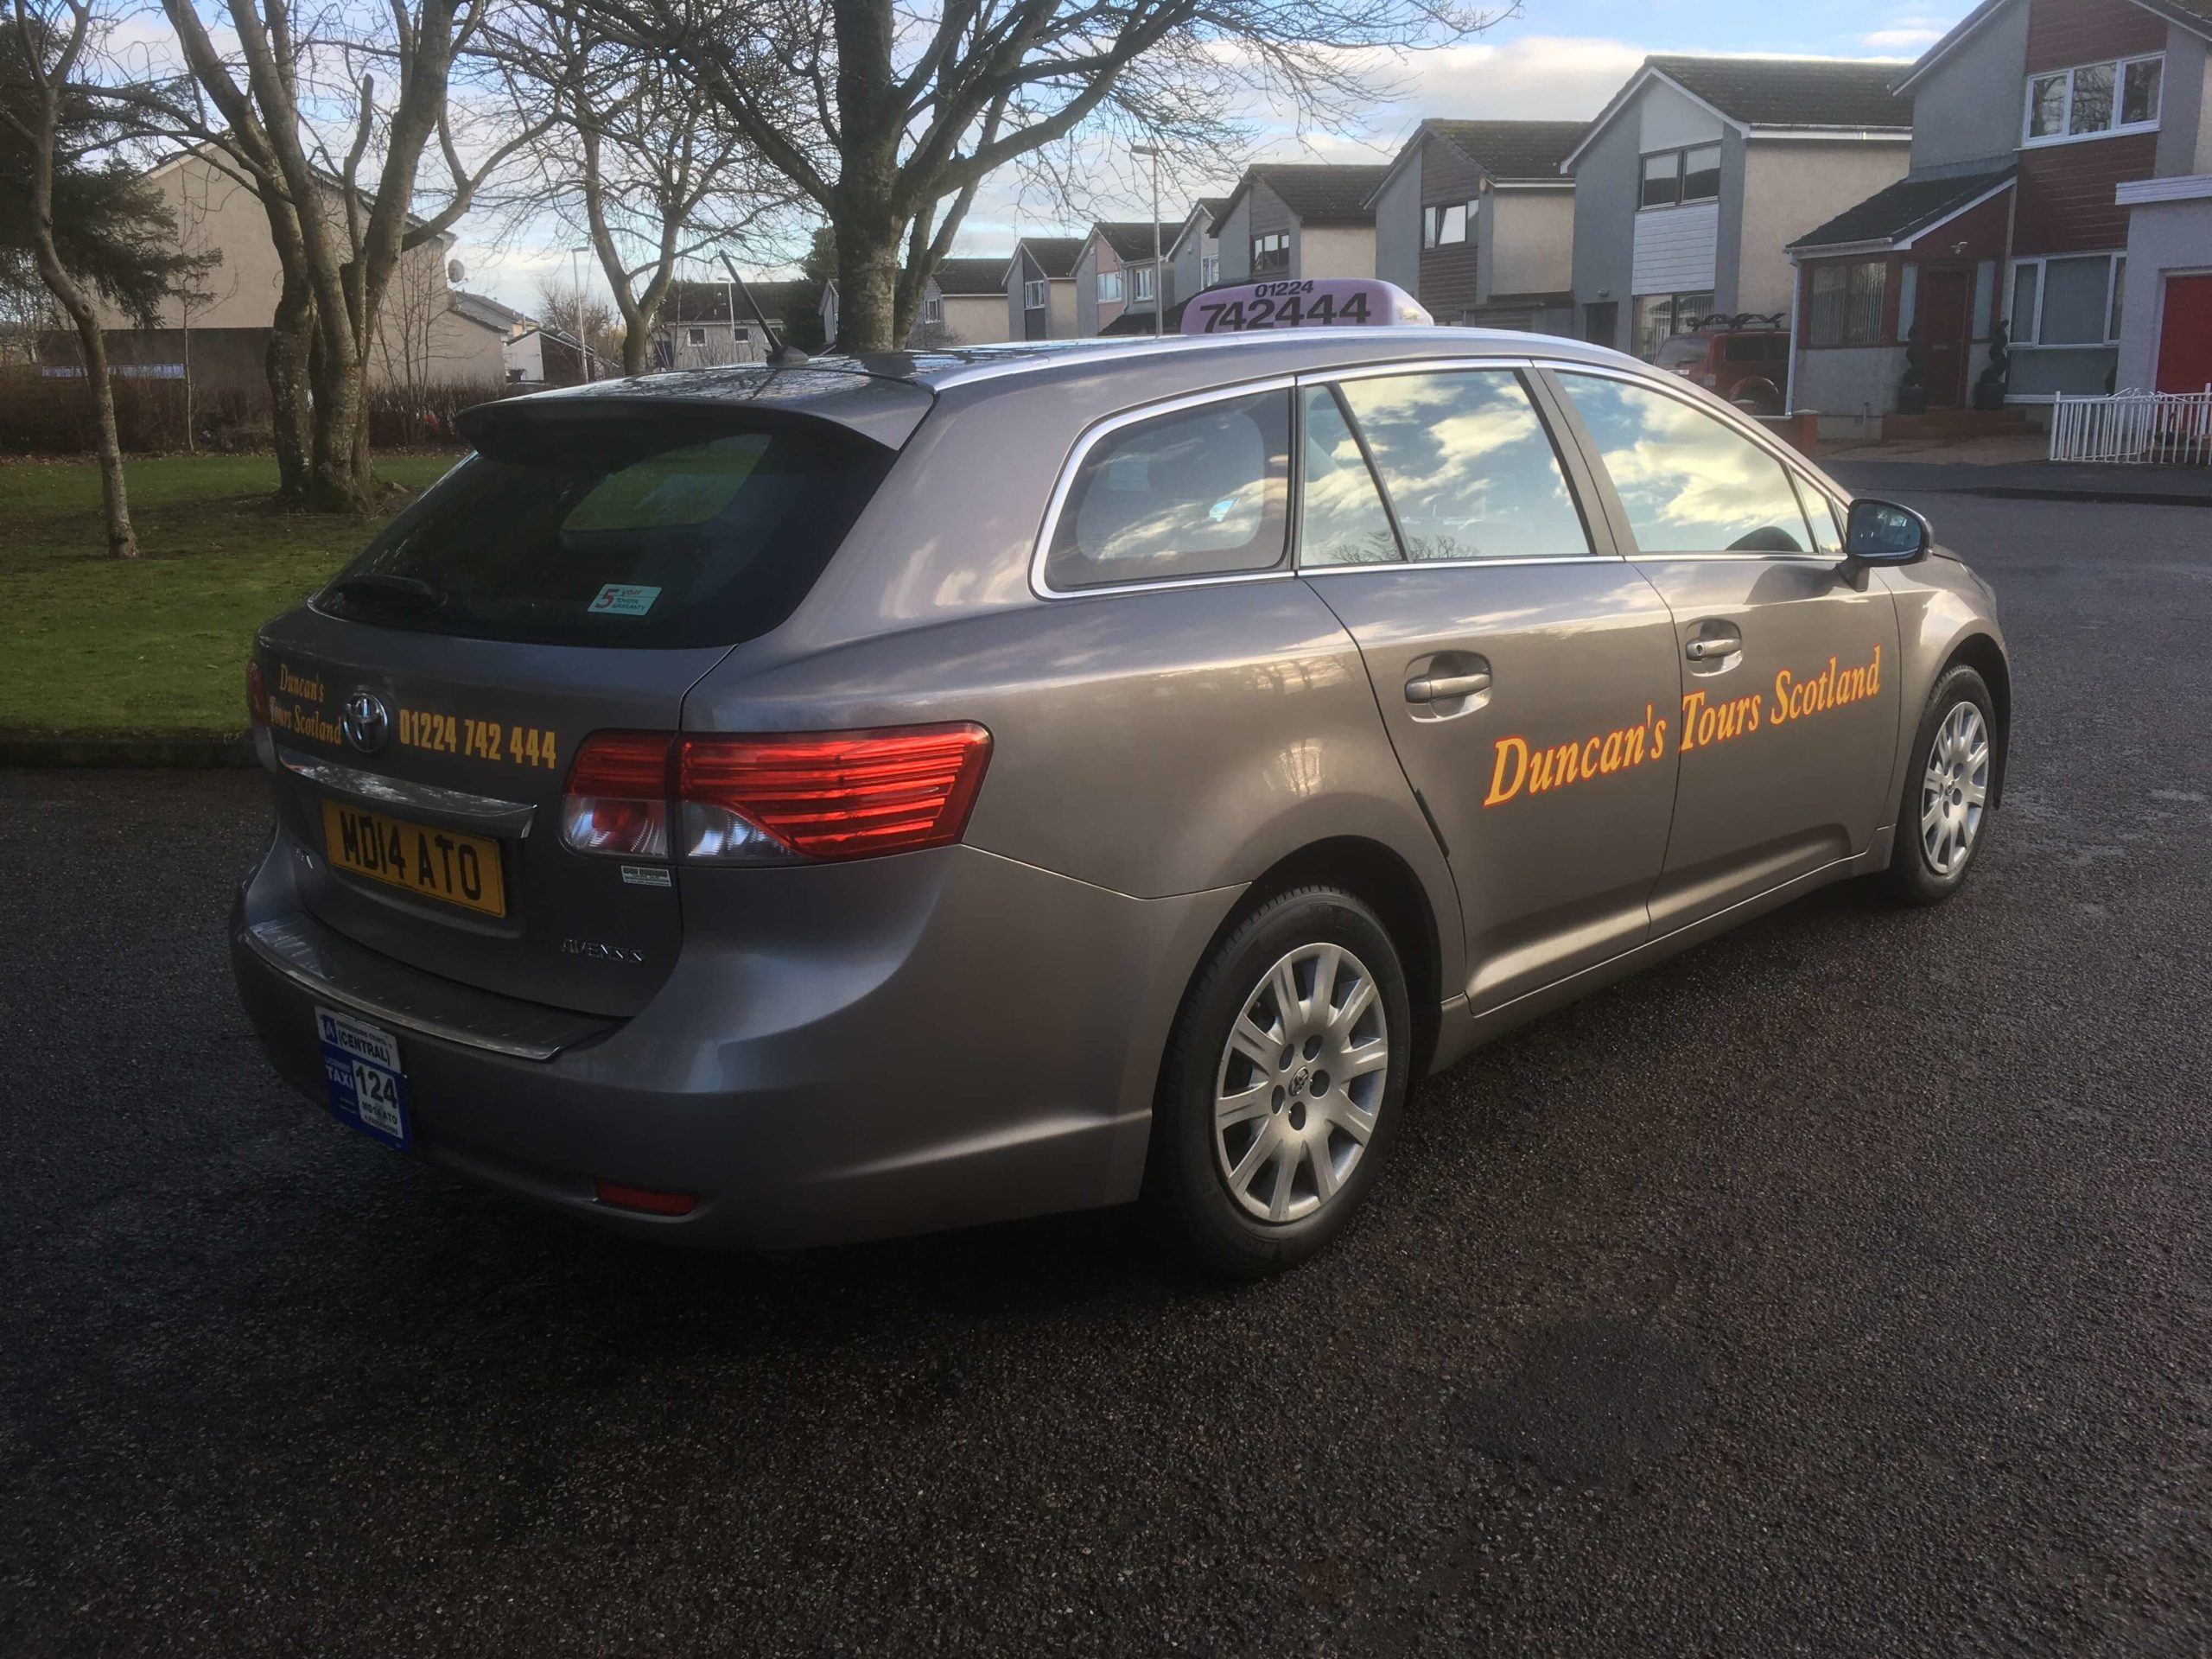 Estate Car Taxi Hire Banchory and Aberdeenshire